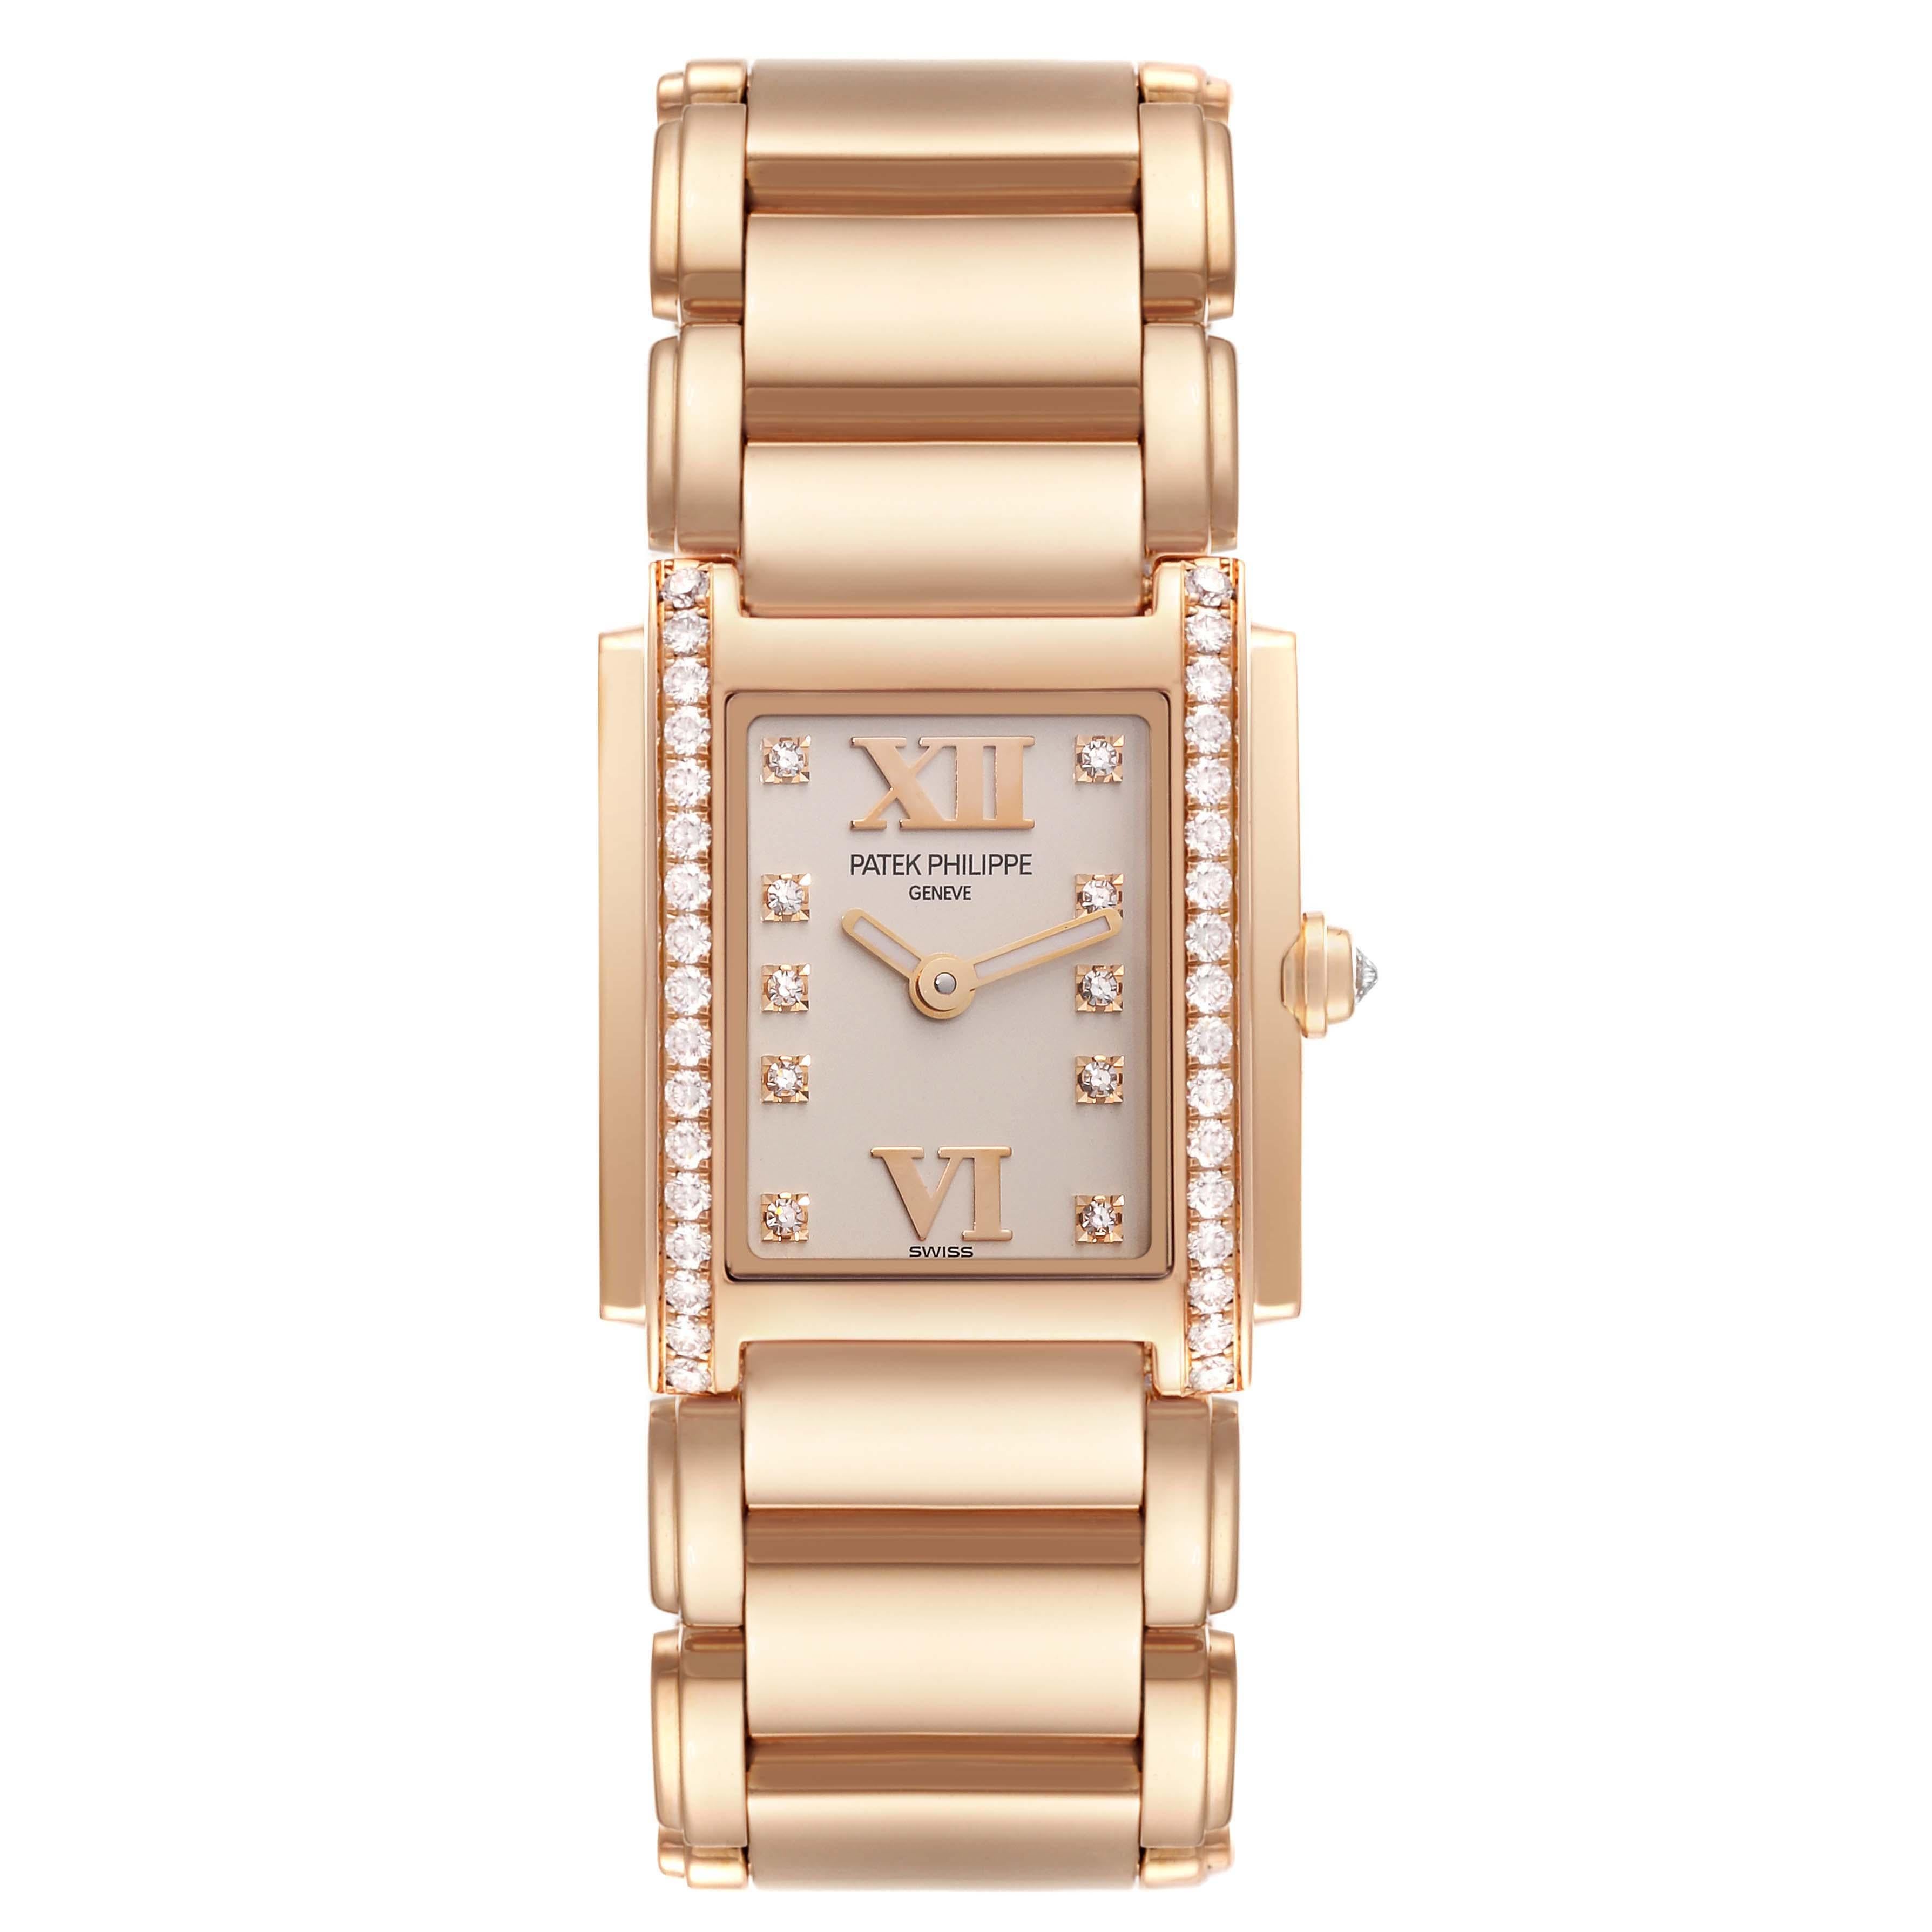 Patek Philippe Twenty-4 Small 18K Rose Gold Diamond Ladies Watch 4908. Quartz movement. 18K rose gold case 22.0 x 26.3 mm encrusted with one row of 34 Top Wesselton quality diamonds weighing approximately 0.43 carats. The crown set with the a single